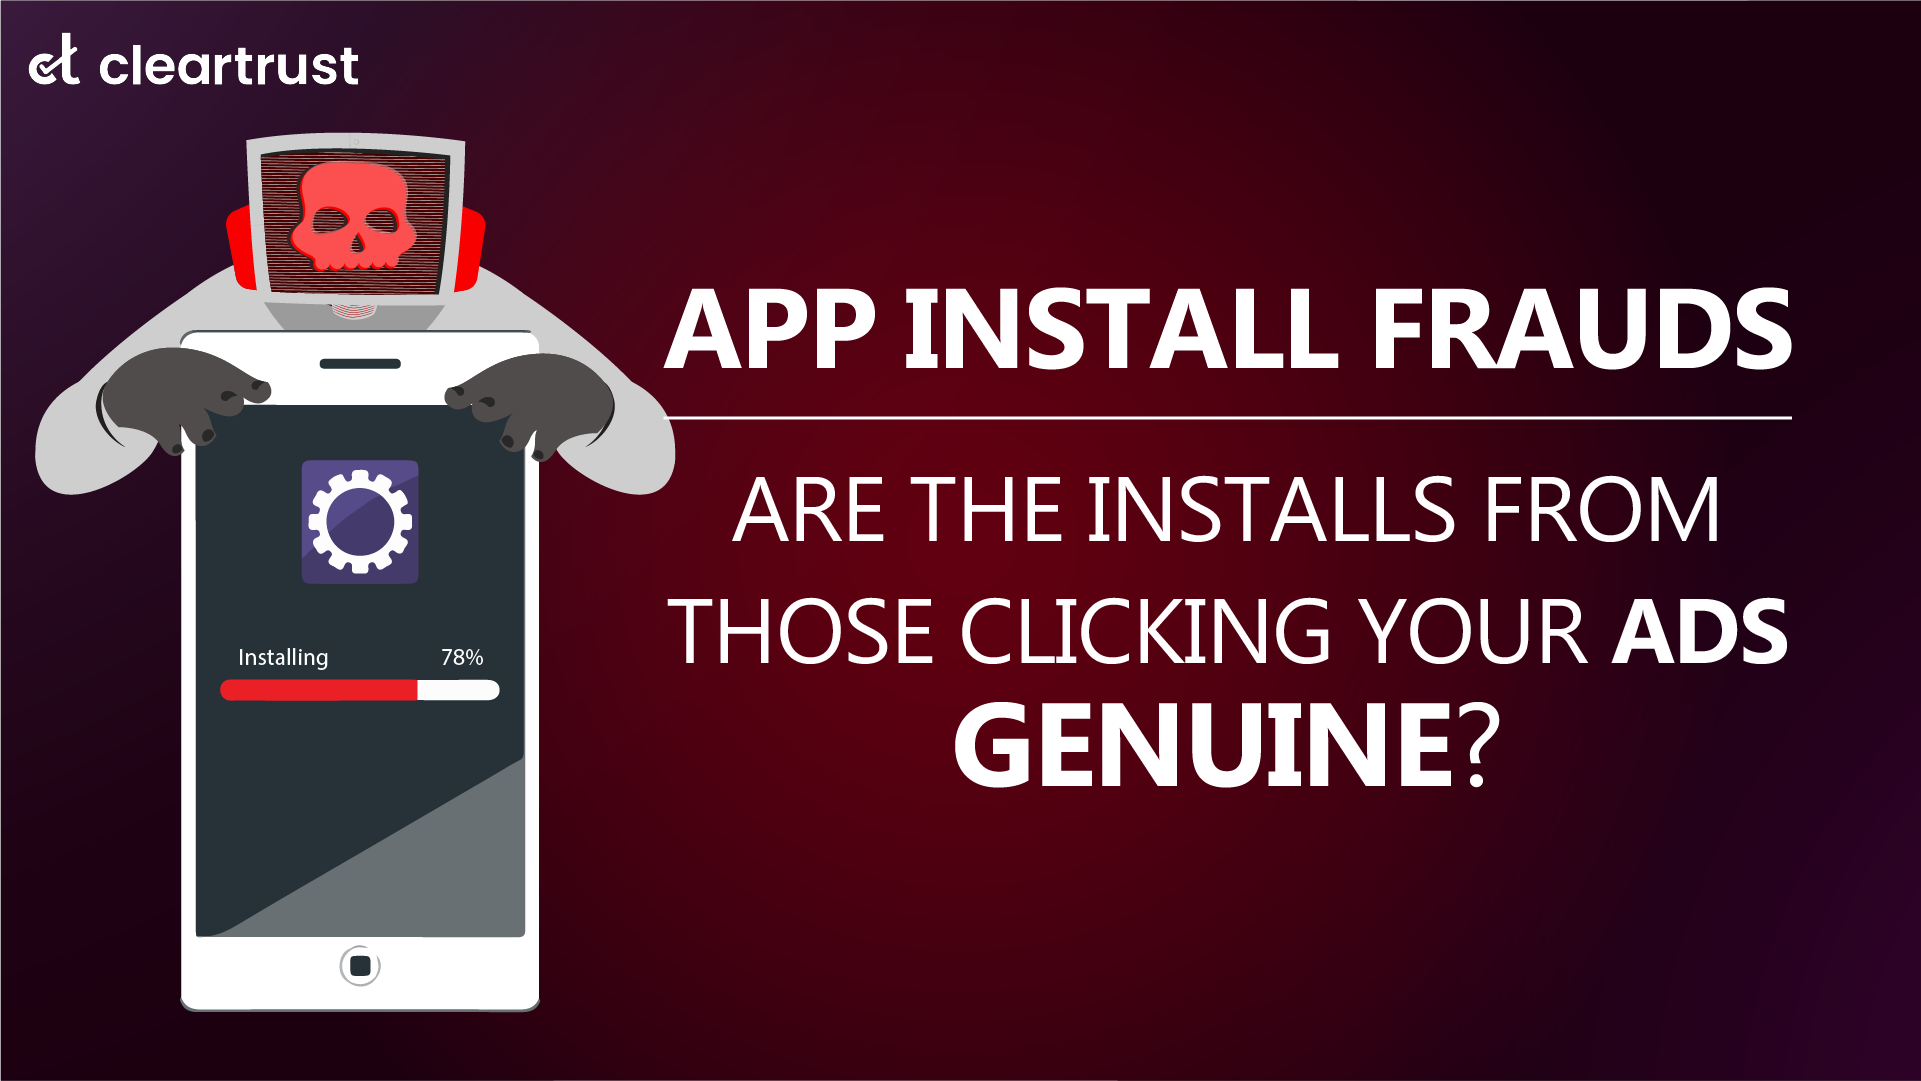 App Install Frauds: Are the installs from those clicking your ads genuine?